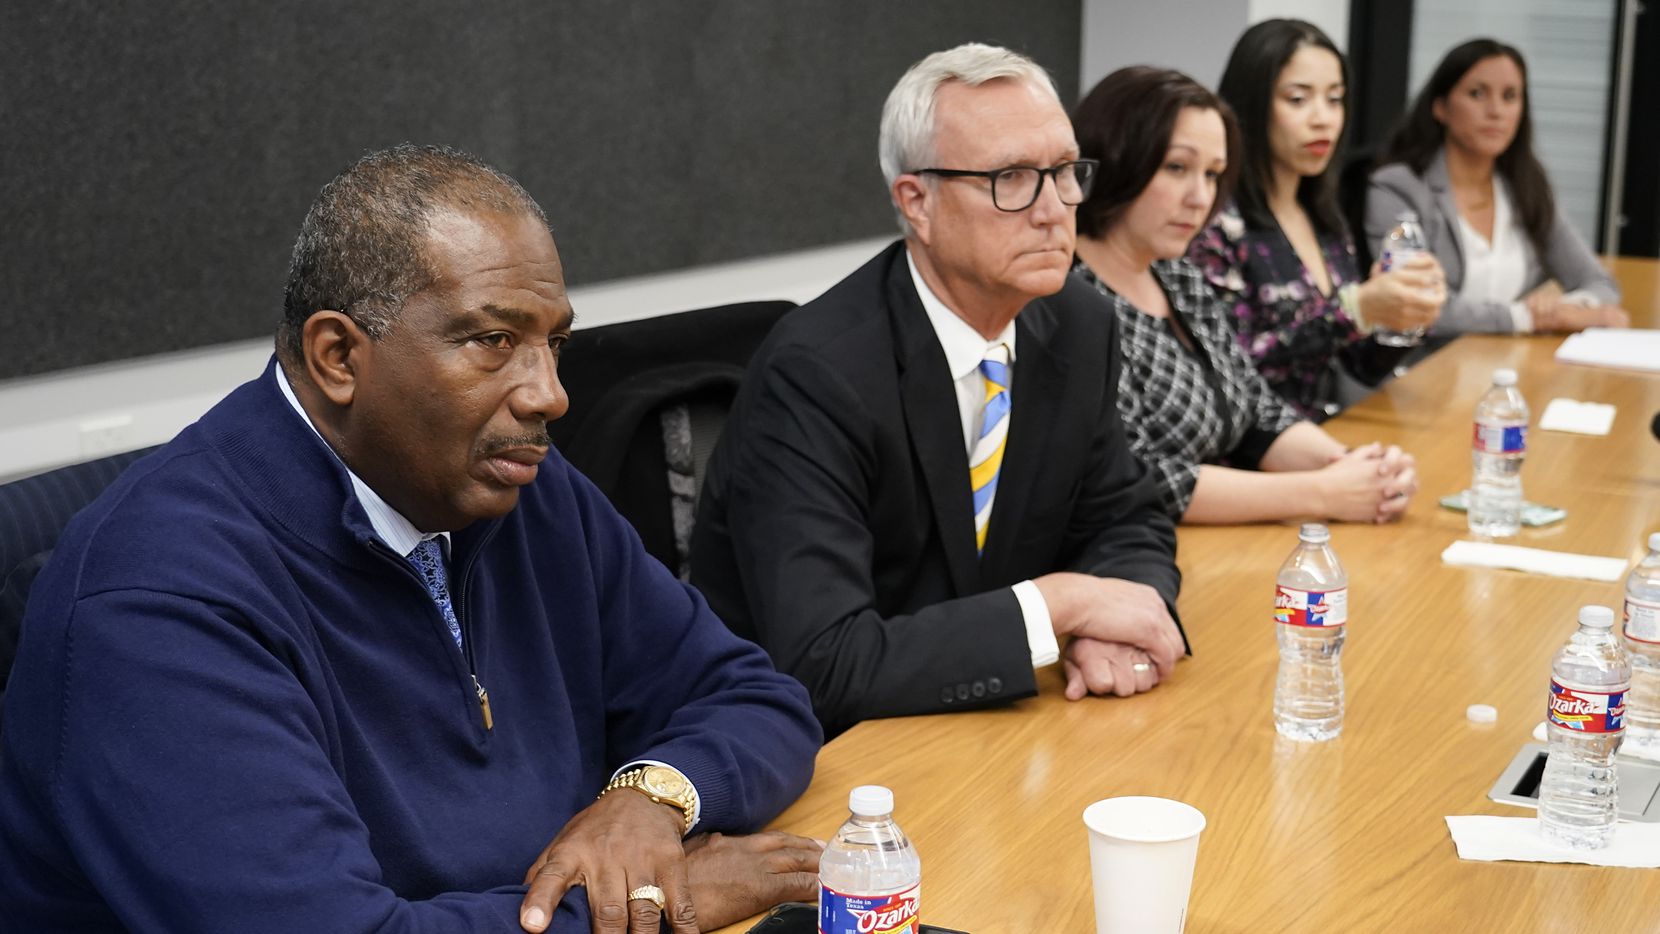 Democratic senate candidates, from left, Royce West, Chris Bell, MJ Hegar, Amanda Edwards and Cristina Tzintzún Ramirez take questions from The Dallas Morning News editorial board on Wednesday, Feb. 5, 2020, in Dallas. (Smiley N. Pool/The Dallas Morning News)